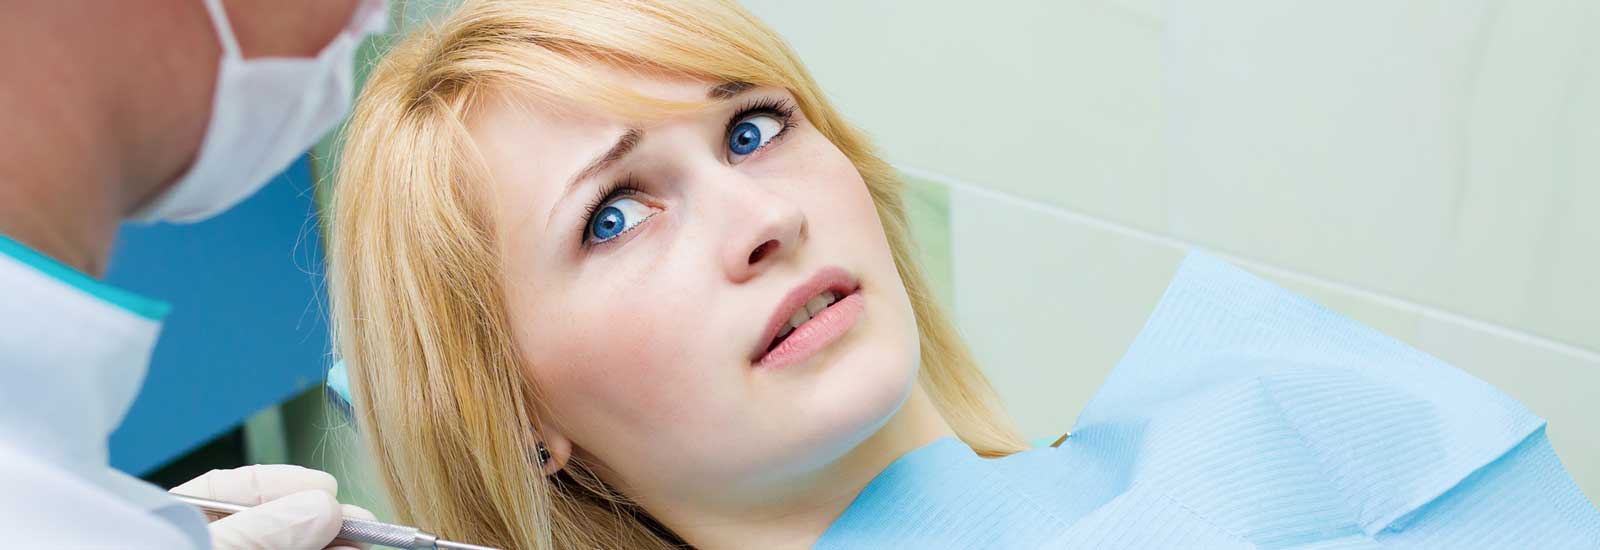 How our team can help relieve dental anxiety